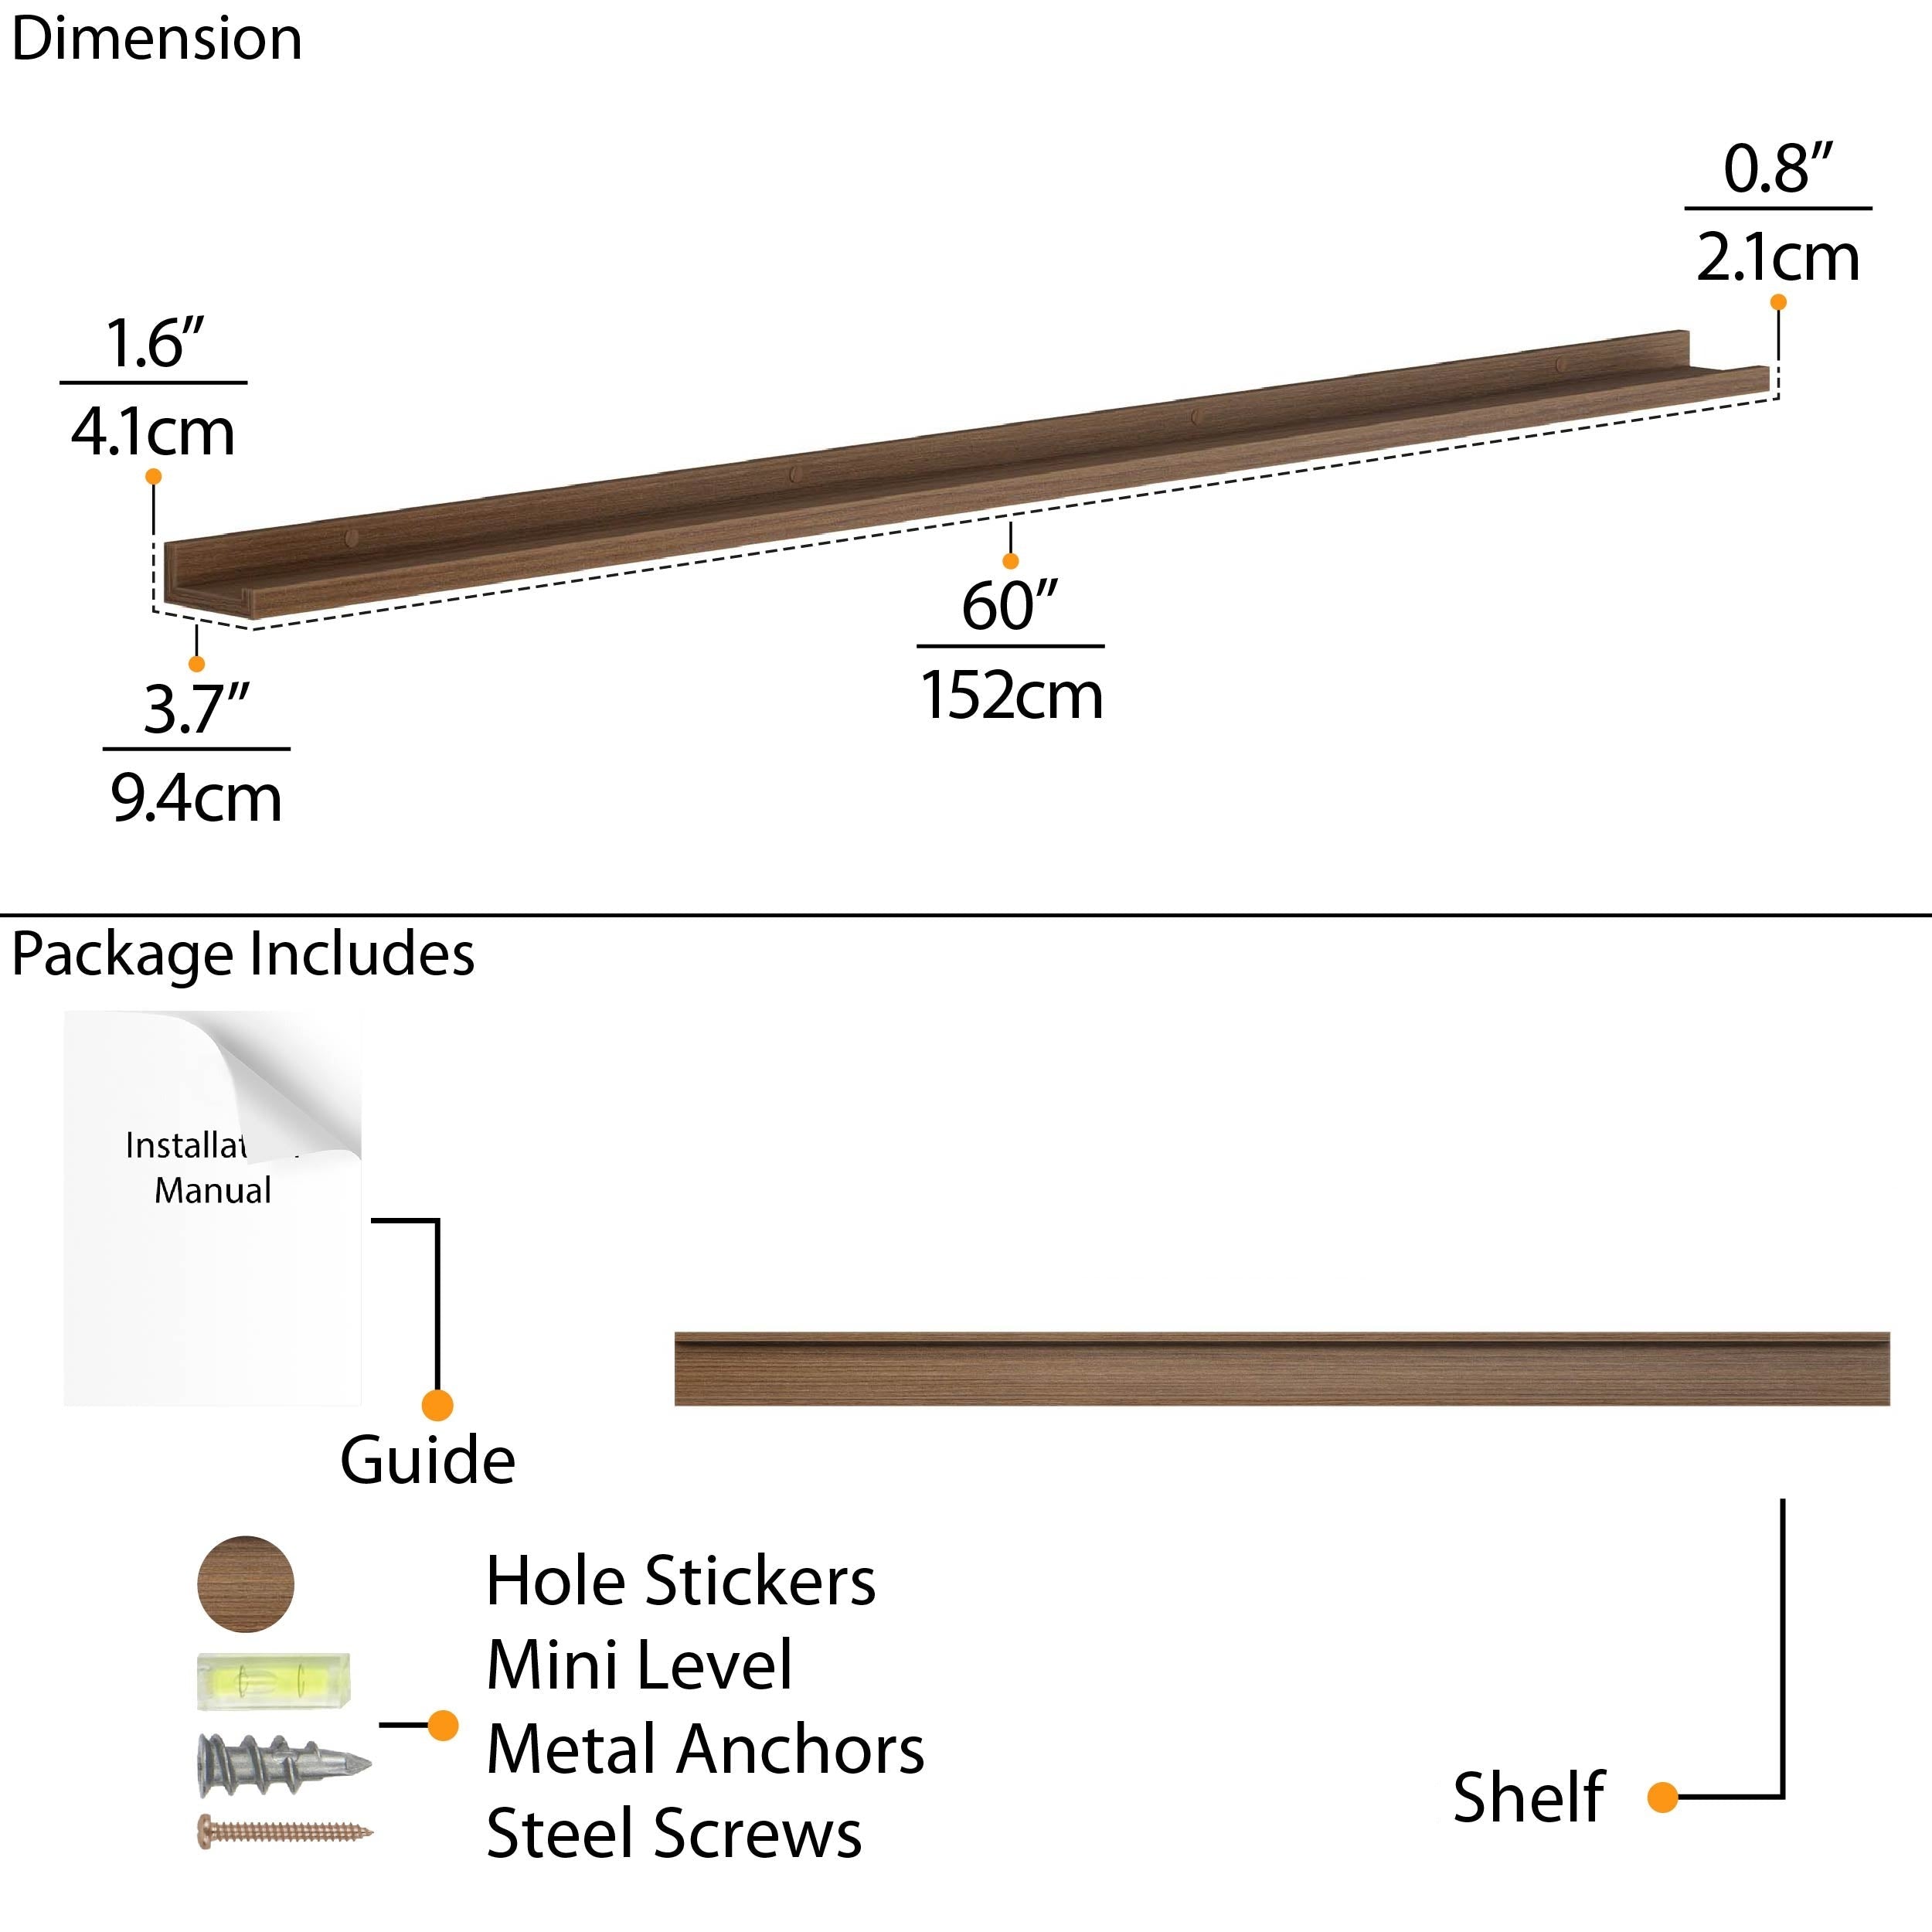 A 60" picture ledge shelf's dimensions and included installation accessories.